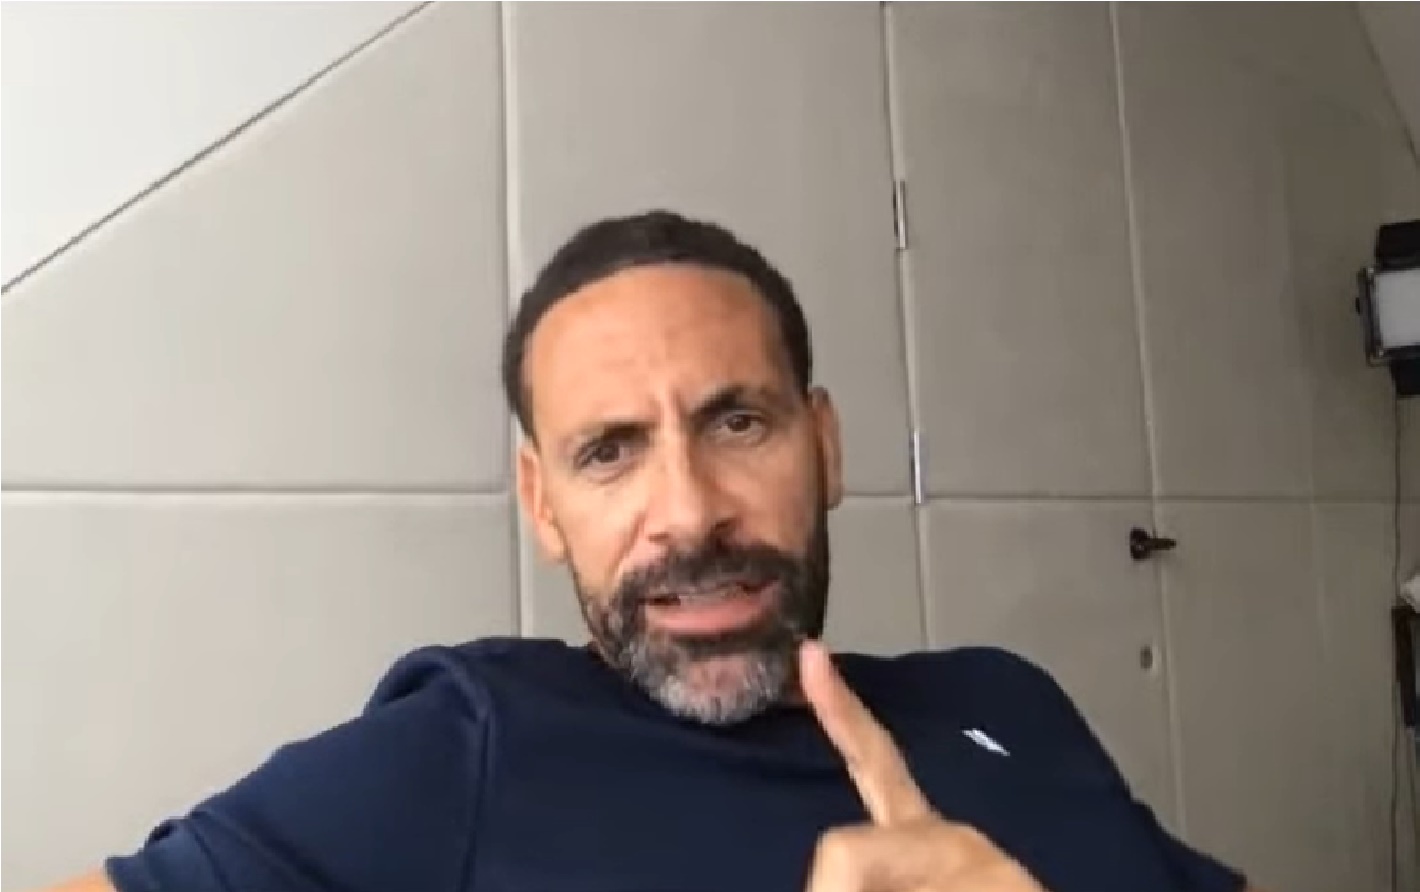 (Video) ‘It’s mad…’ – Rio Ferdinand hits back at critics of ‘disrespected’ Liverpool player